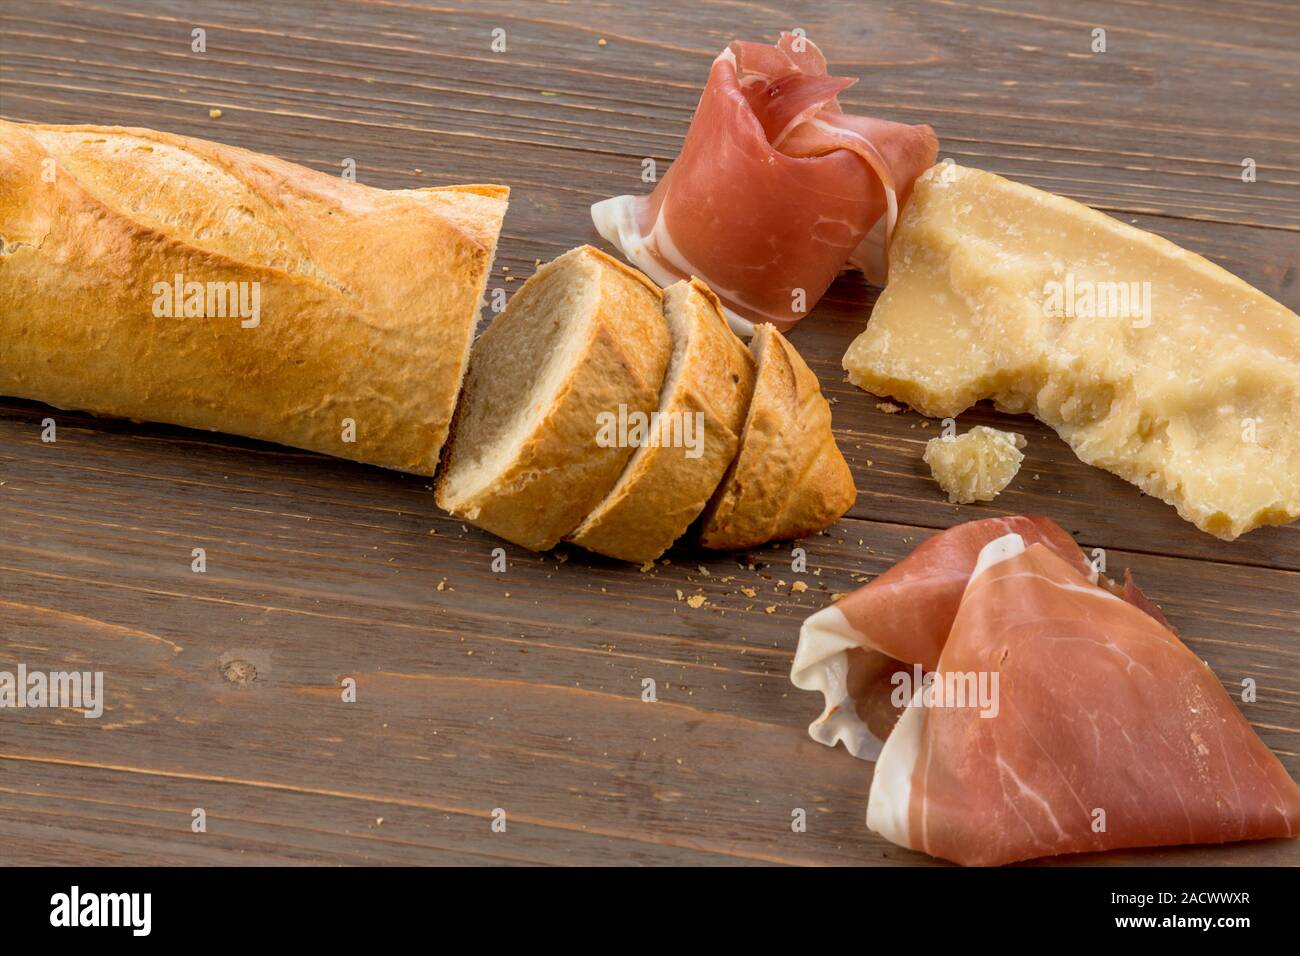 Wake up from white bread Stock Photo